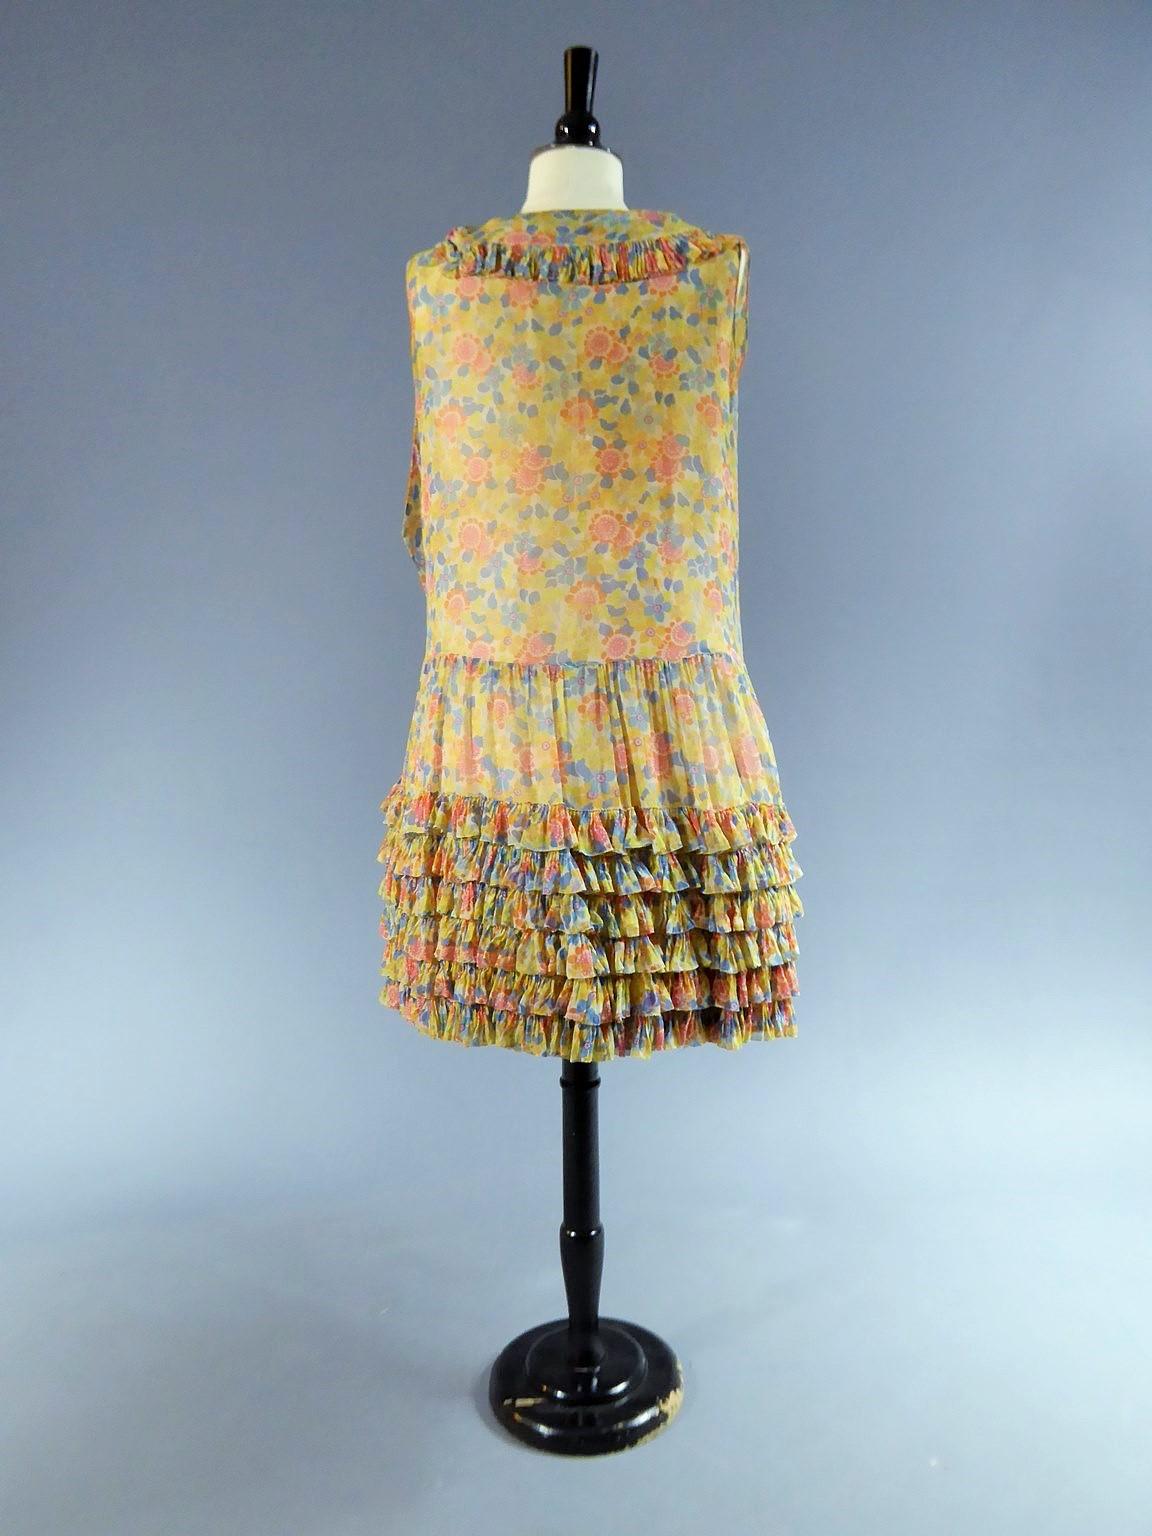 A French Callot Soeurs Couture Summer dress - Art Deco Period Circa 1925 For Sale 1